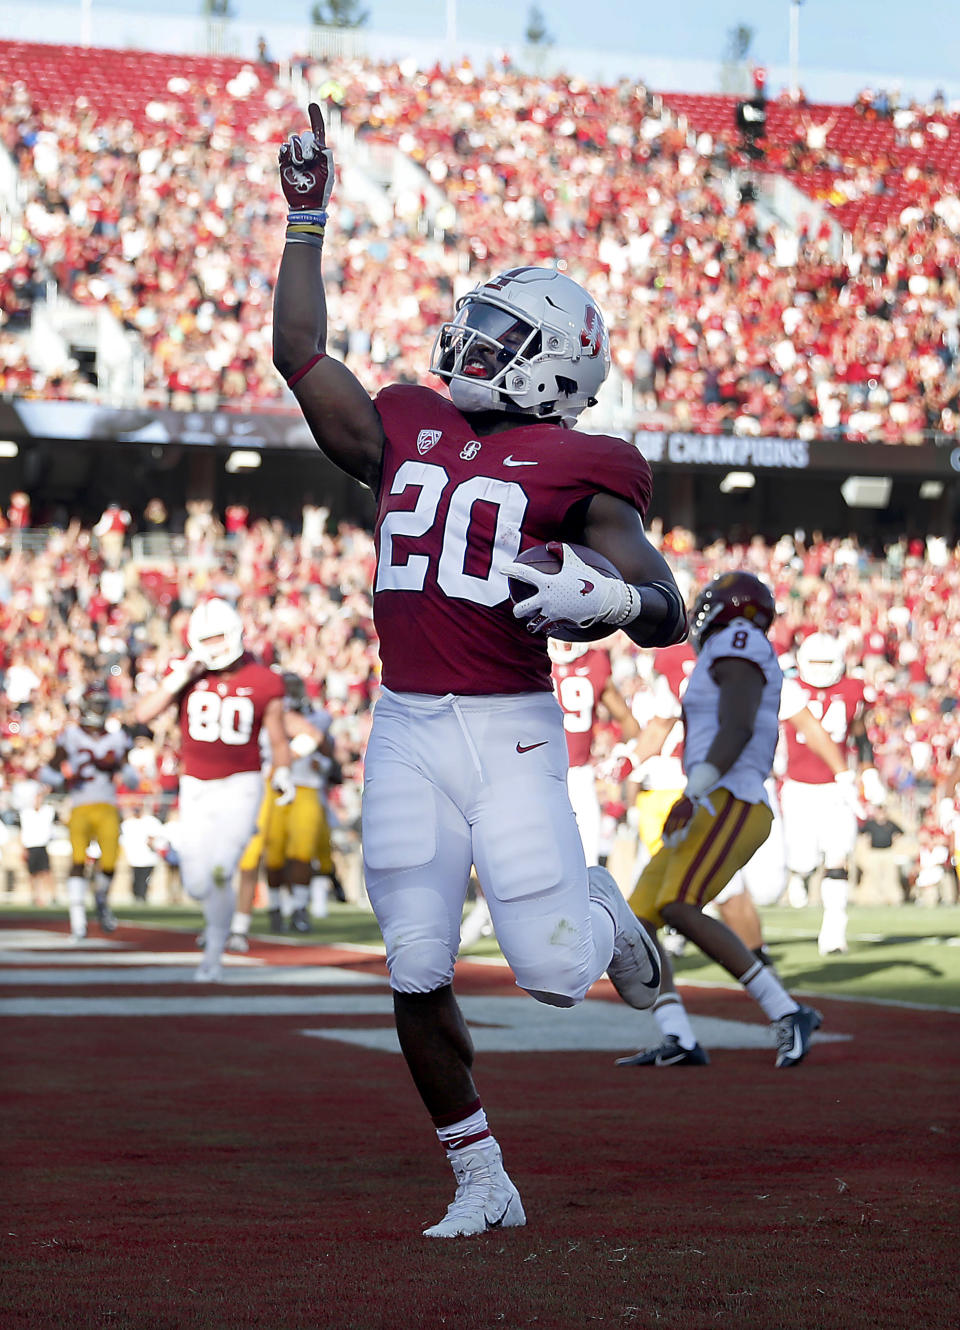 Stanford Cardinal running back Bryce Love (20) celebrates after scoring a touchdown against Southern California during the first half of an NCAA college football game, Saturday, Sept. 8, 2018, in Stanford, Calif. (AP Photo/Tony Avelar)